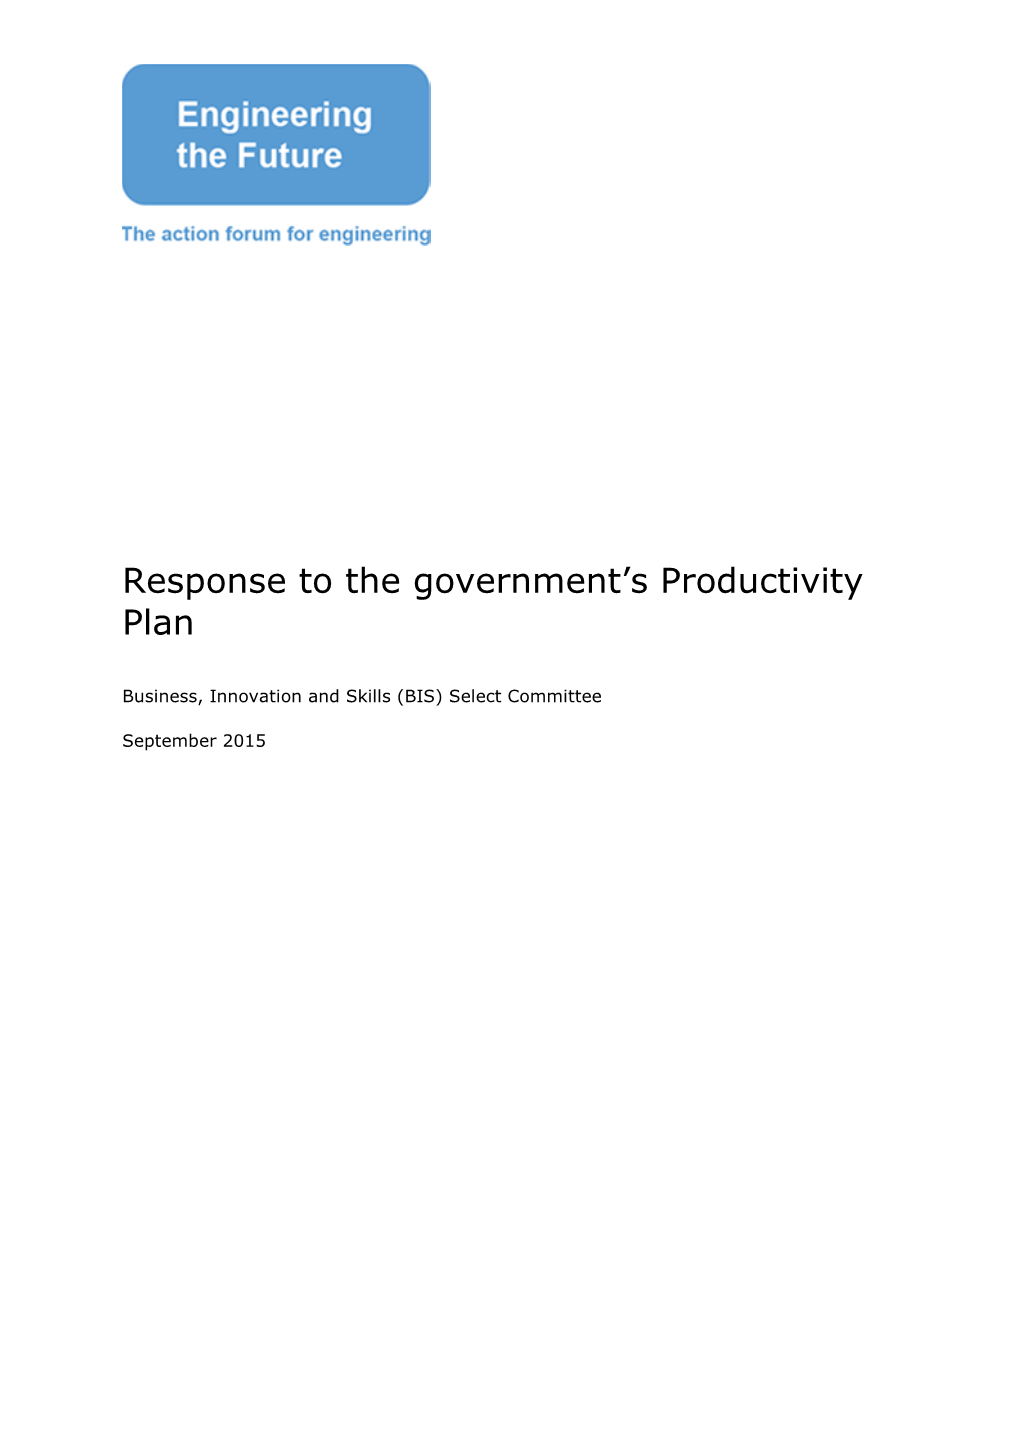 Etf Response to the Government's Productivity Plan